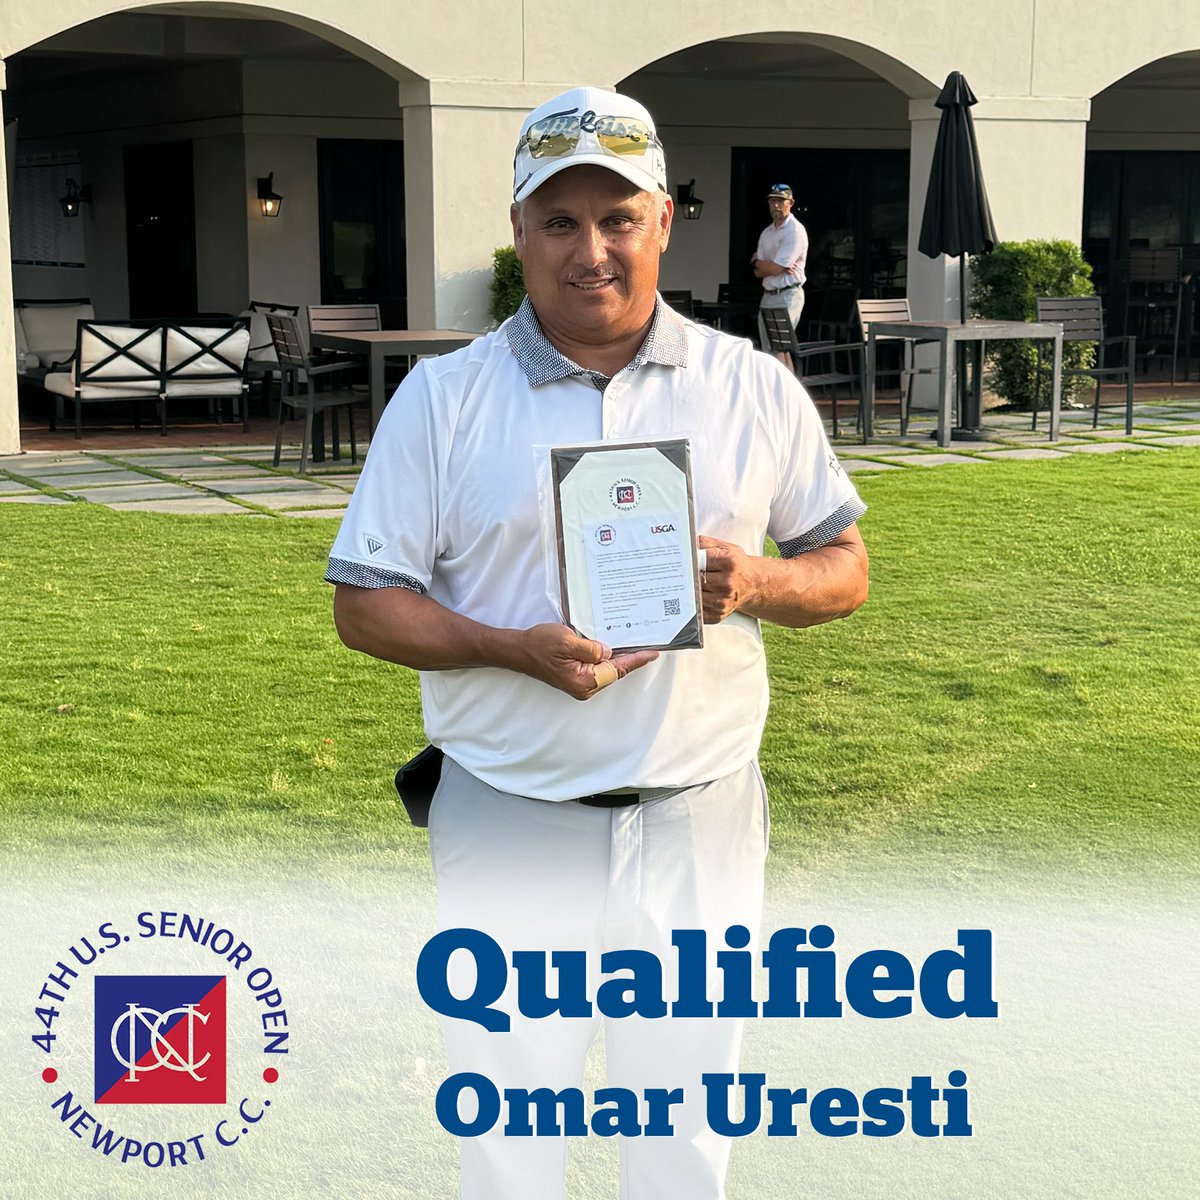 Congratulations to Kris Blanks, Omar Uresti, and Mark Walker (not pictured) on qualifying at our Black Hawk CC qualifier yesterday! These three gentlemen will head to the U.S. Senior Open at Newport CC this June! Kris Blanks finished as medalist after finishing with a -4 68! Good